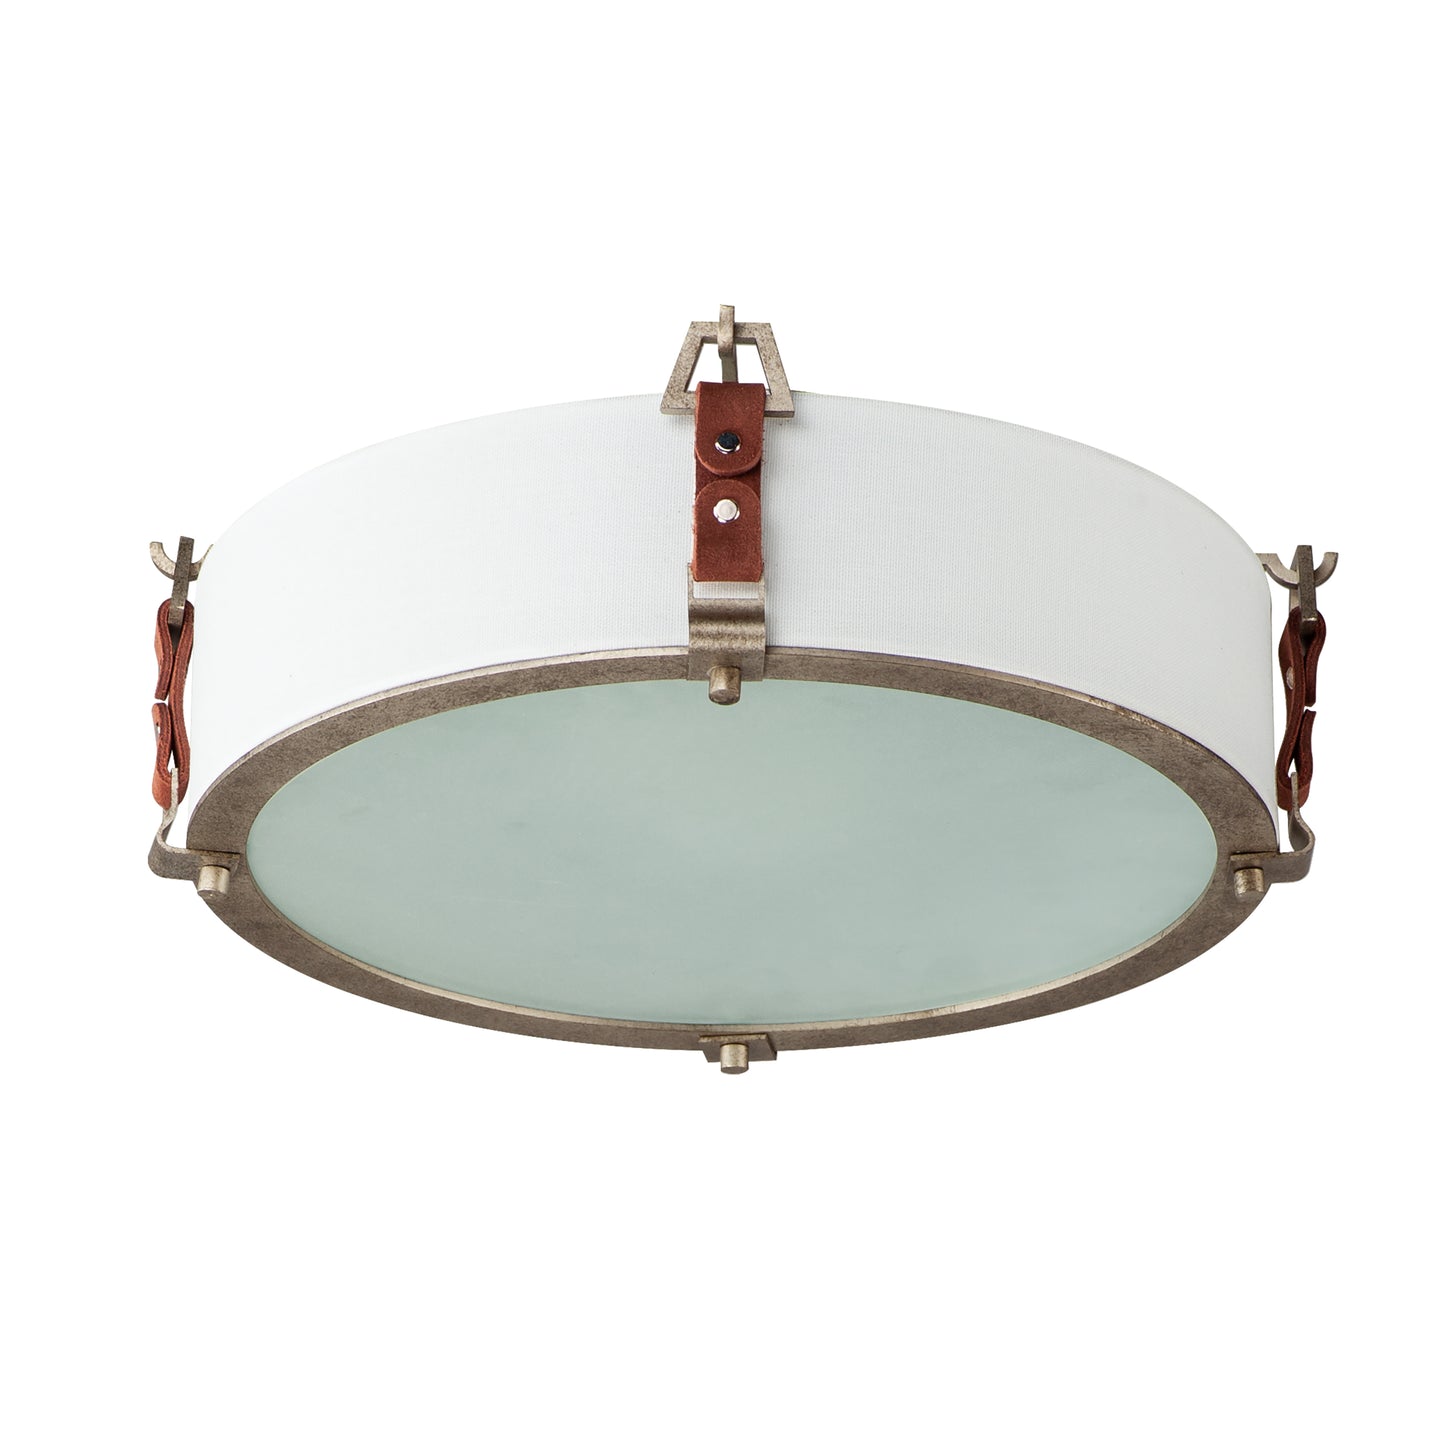 16130FTWZBSD - Sausalito 16" Flush Mount Ceiling Light - Weathered Zinc / Brown Suede